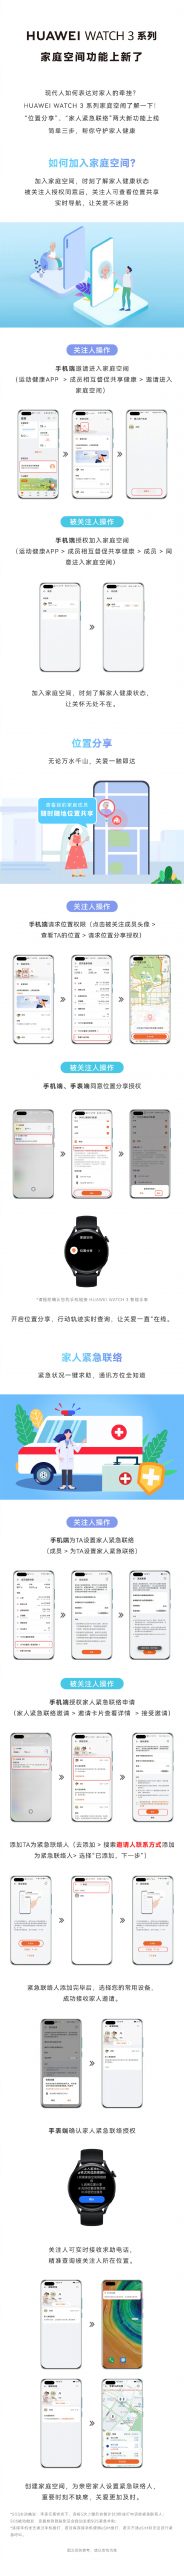 Huawei Watch 3 series new features